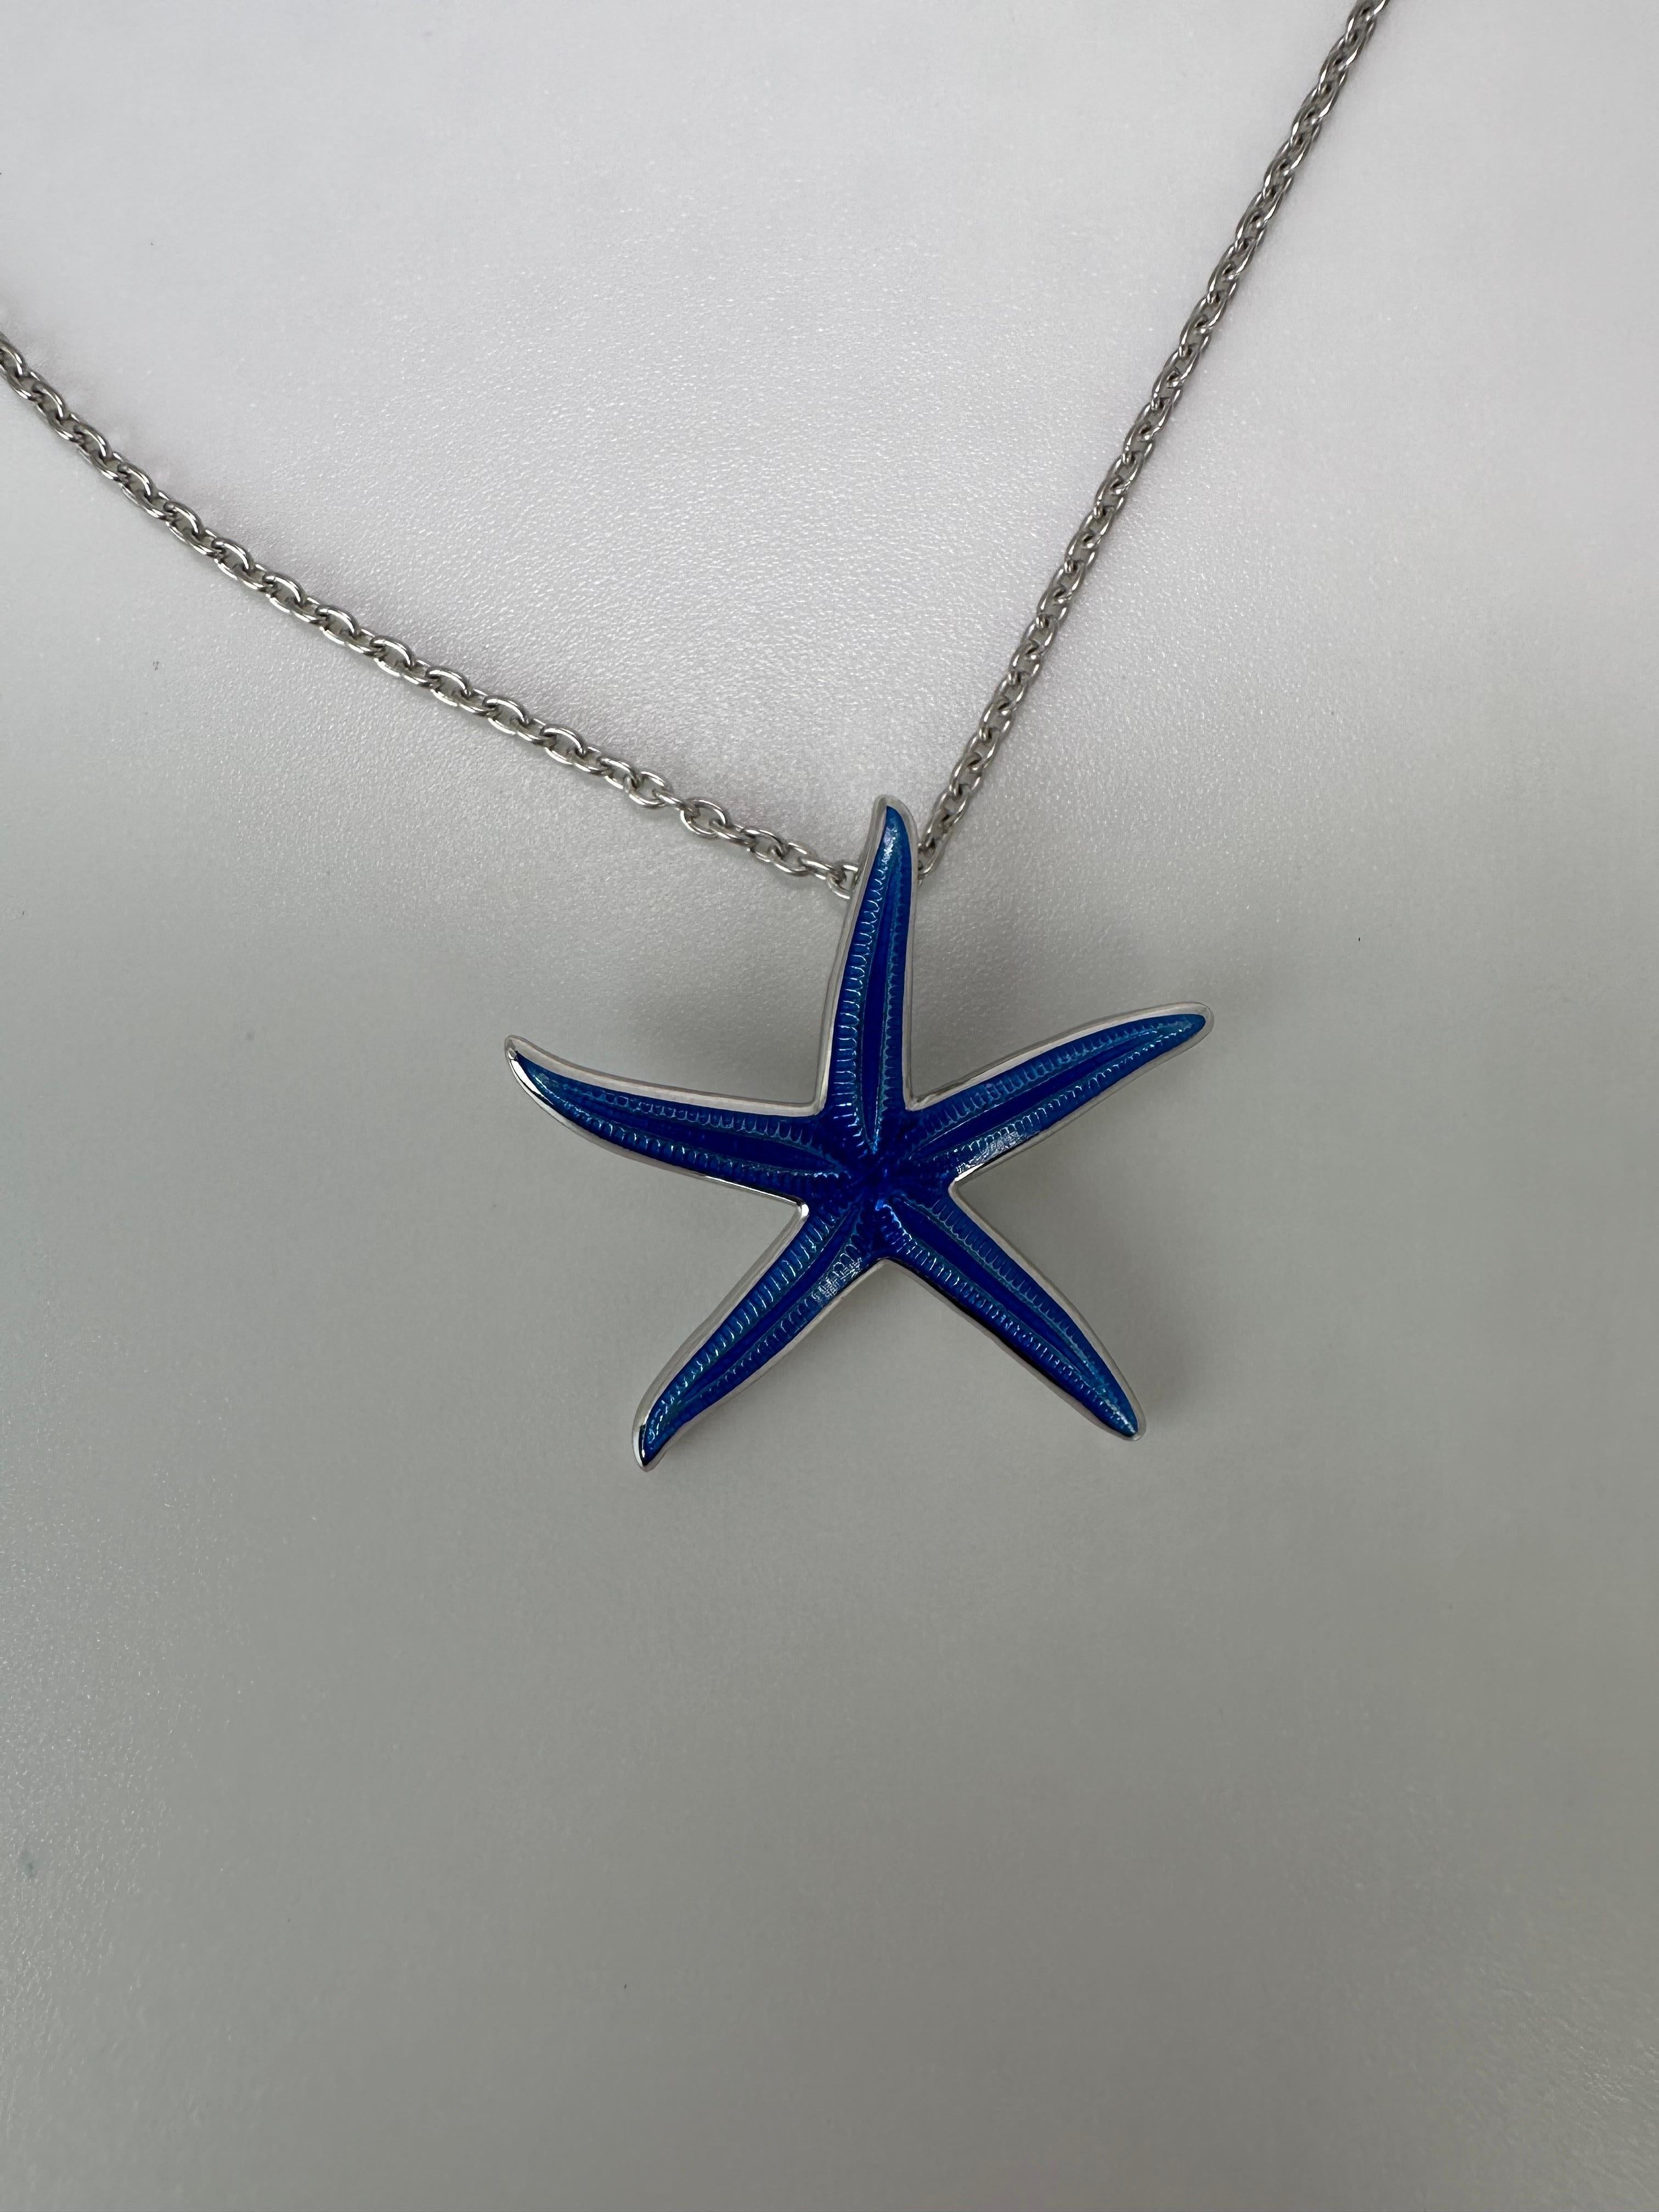 Starfish pendant necklace SS 925 modern sea pendant In New Condition For Sale In Jupiter, FL